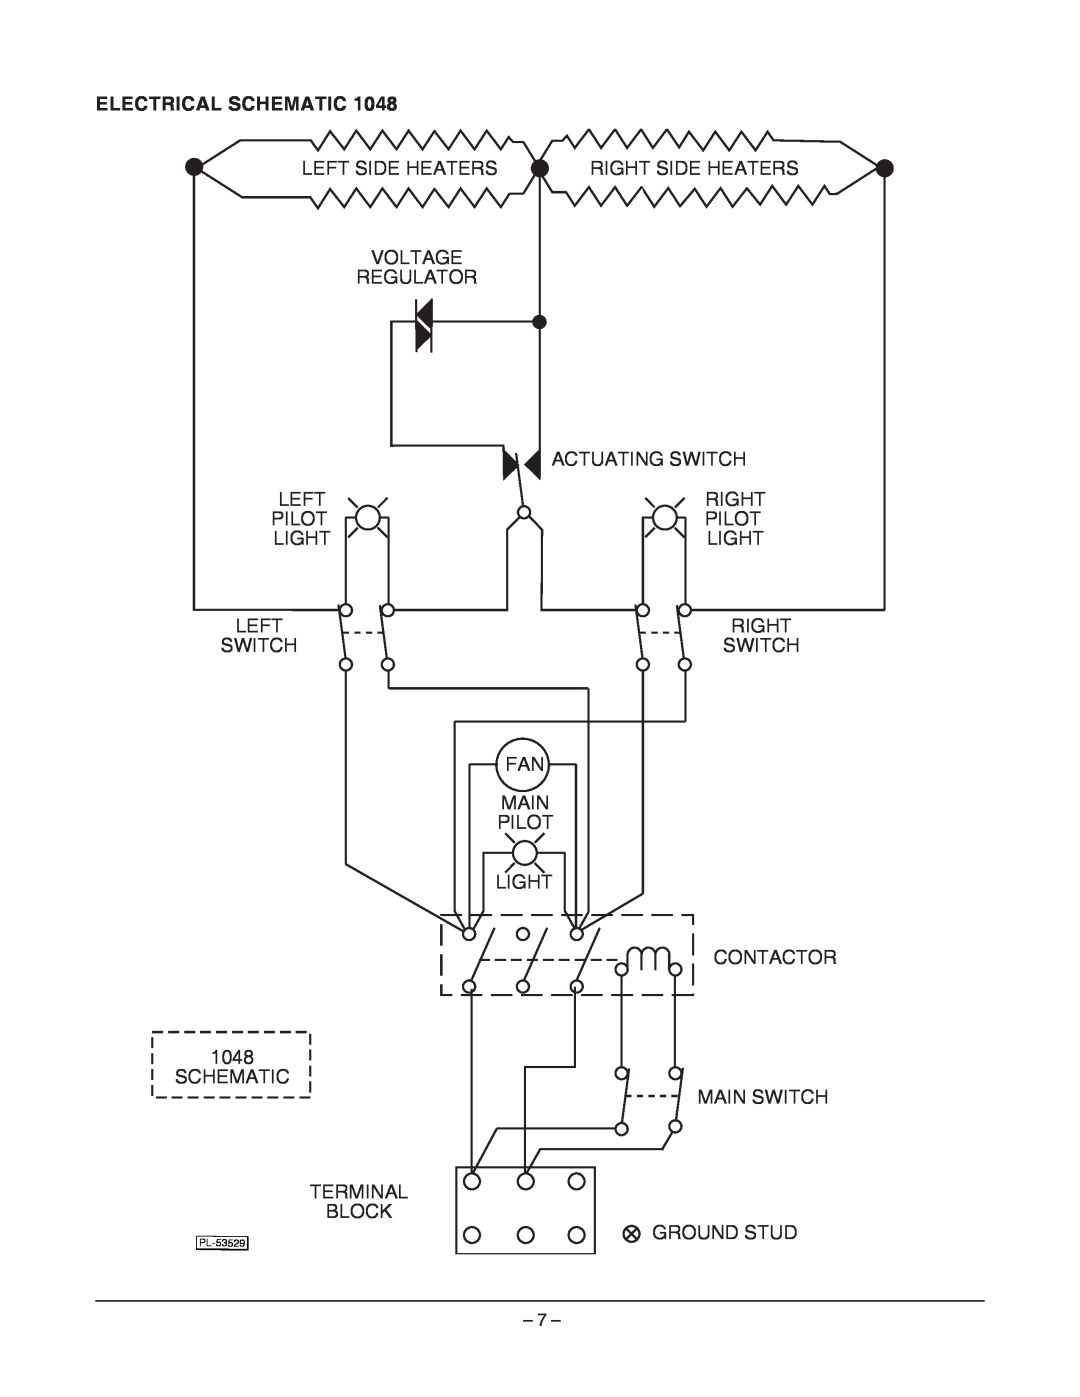 Vulcan-Hart 024C ML-103833 Electrical Schematic, Left Side Heaters, Right Side Heaters, Voltage Regulator Actuating Switch 